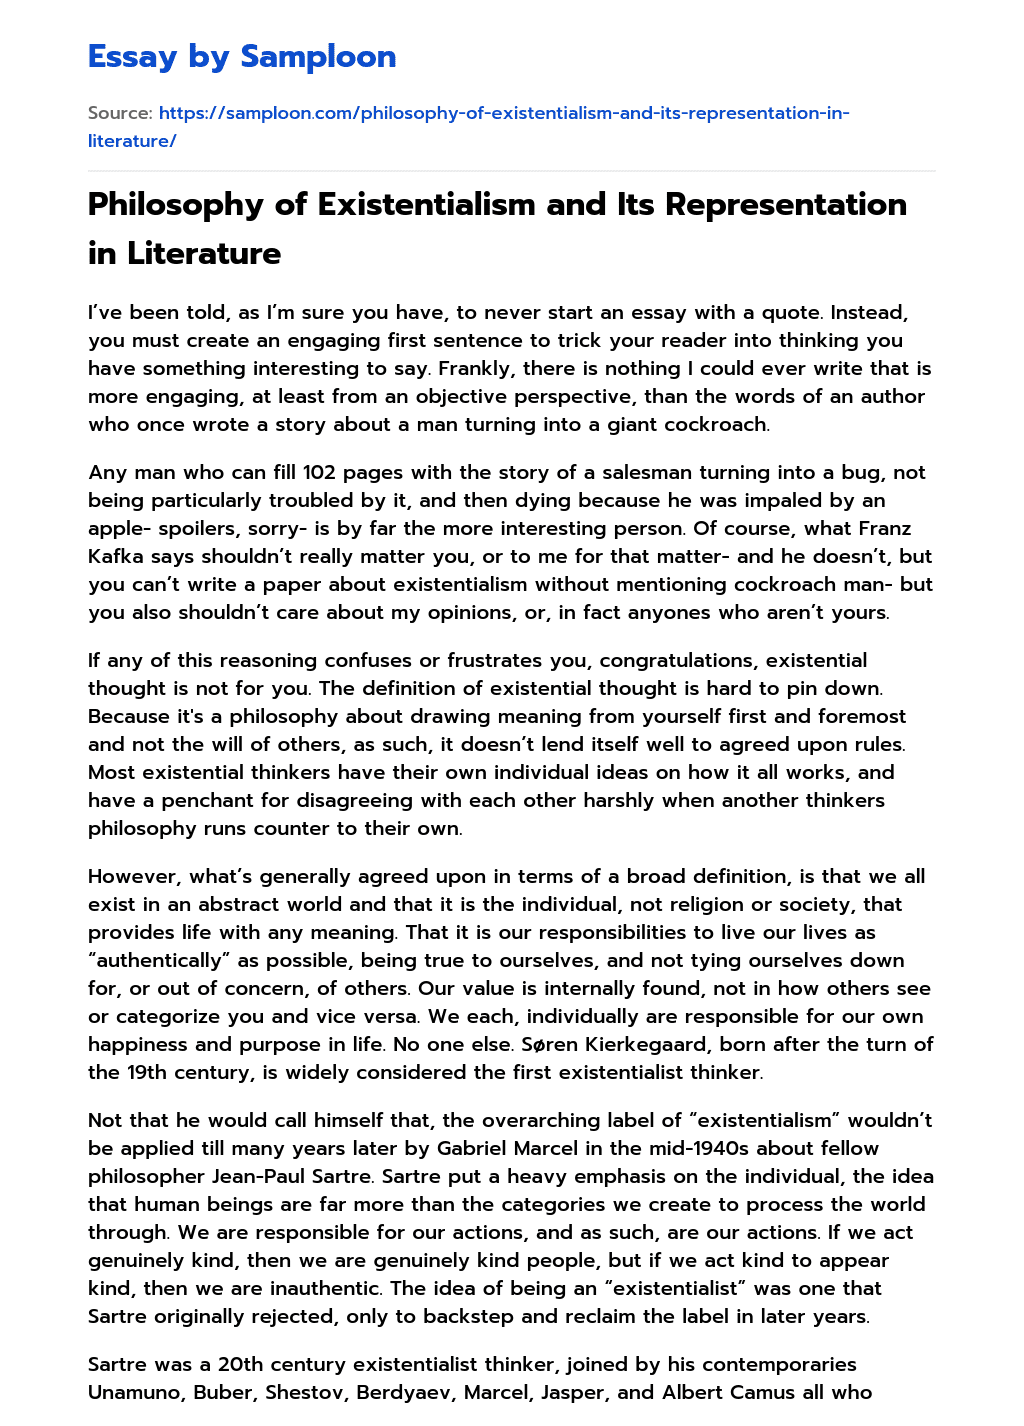 Philosophy of Existentialism and Its Representation in Literature essay